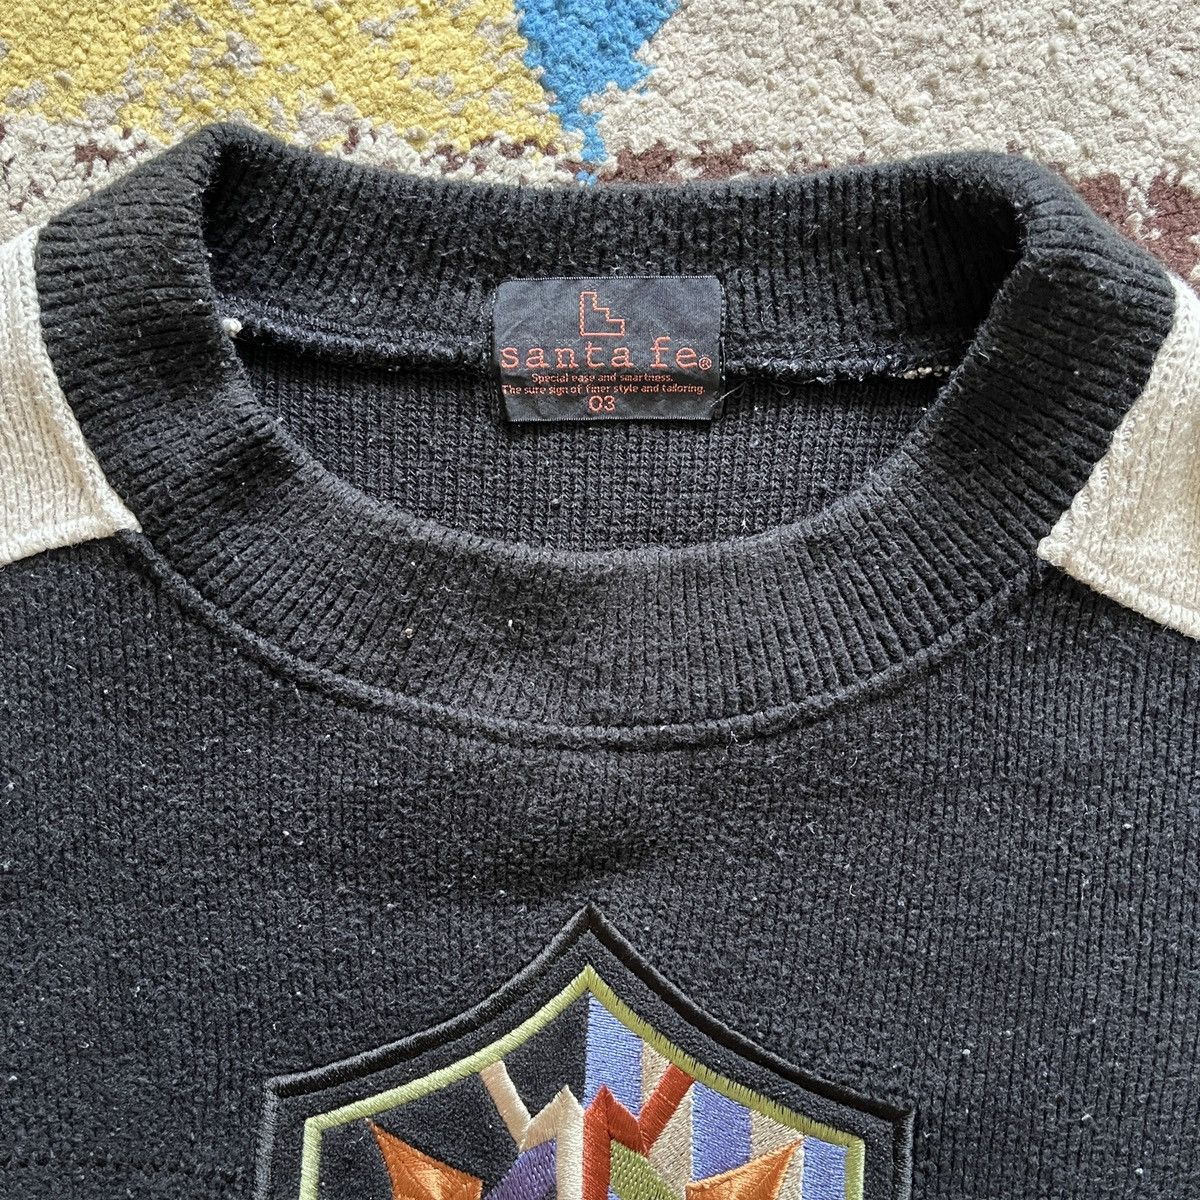 Vintage Santafe Embroidery Sweater Knitwear Made In Japan - 4